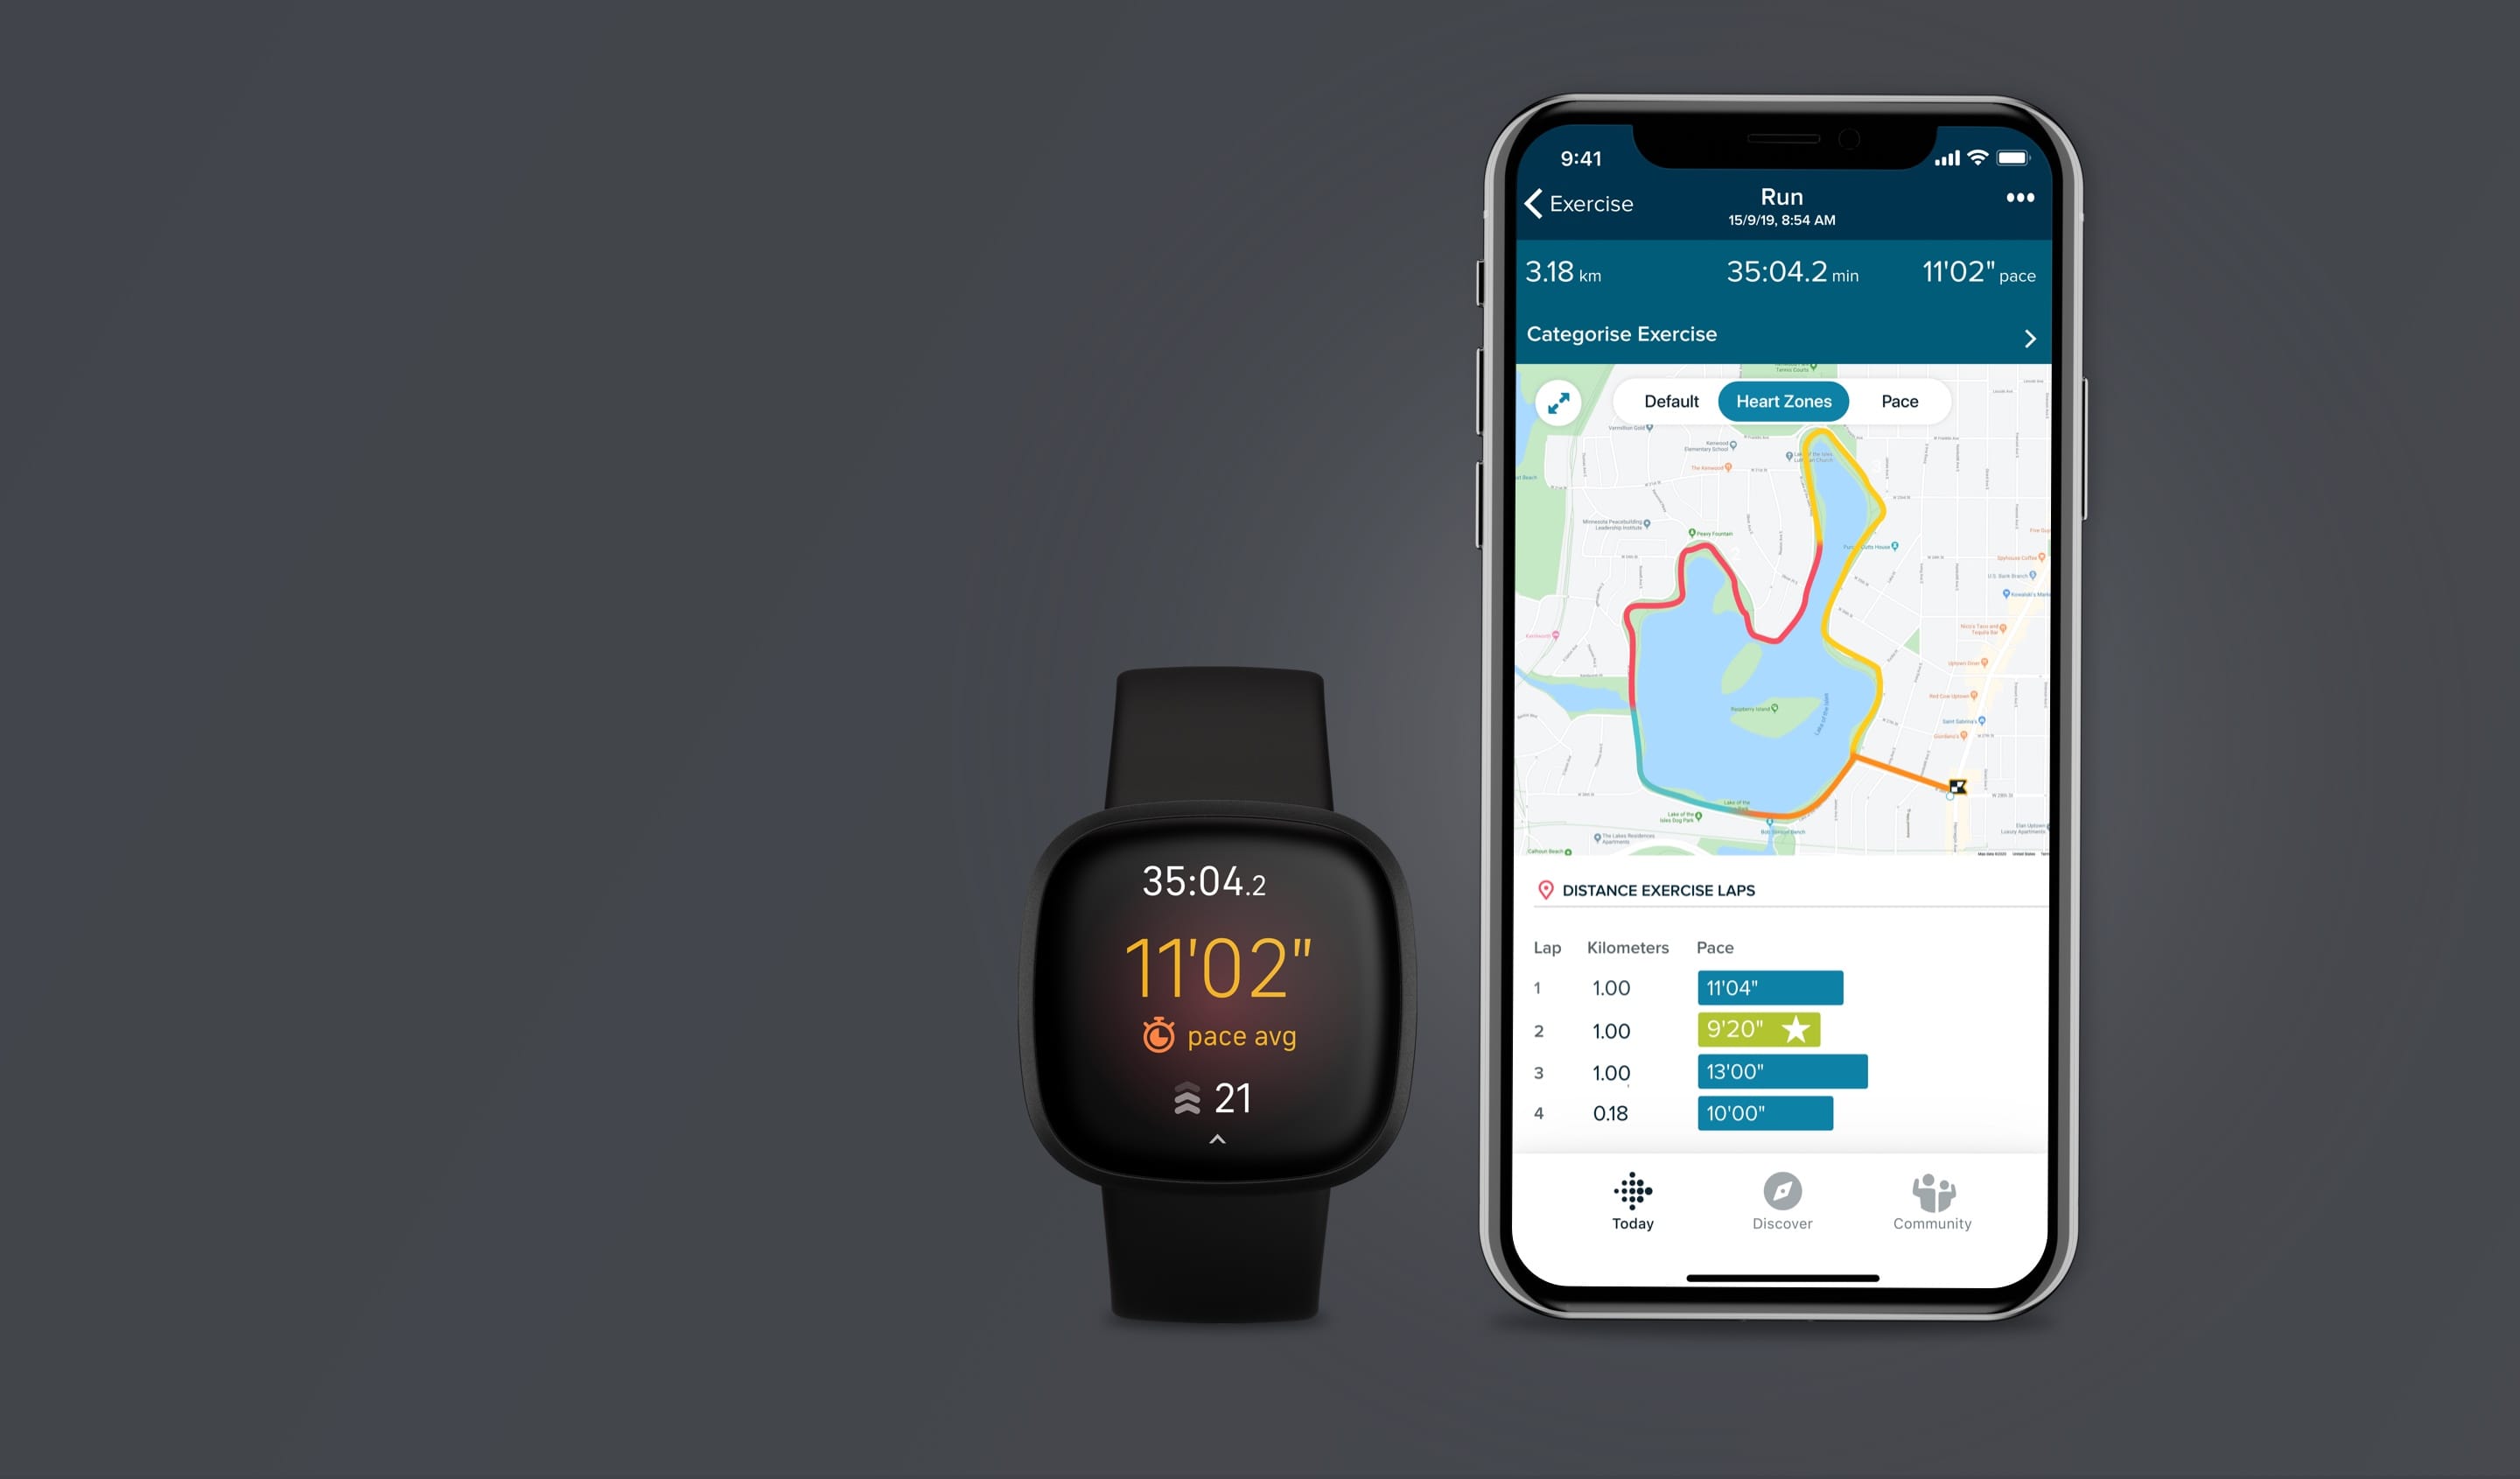 which fitbits have built in gps